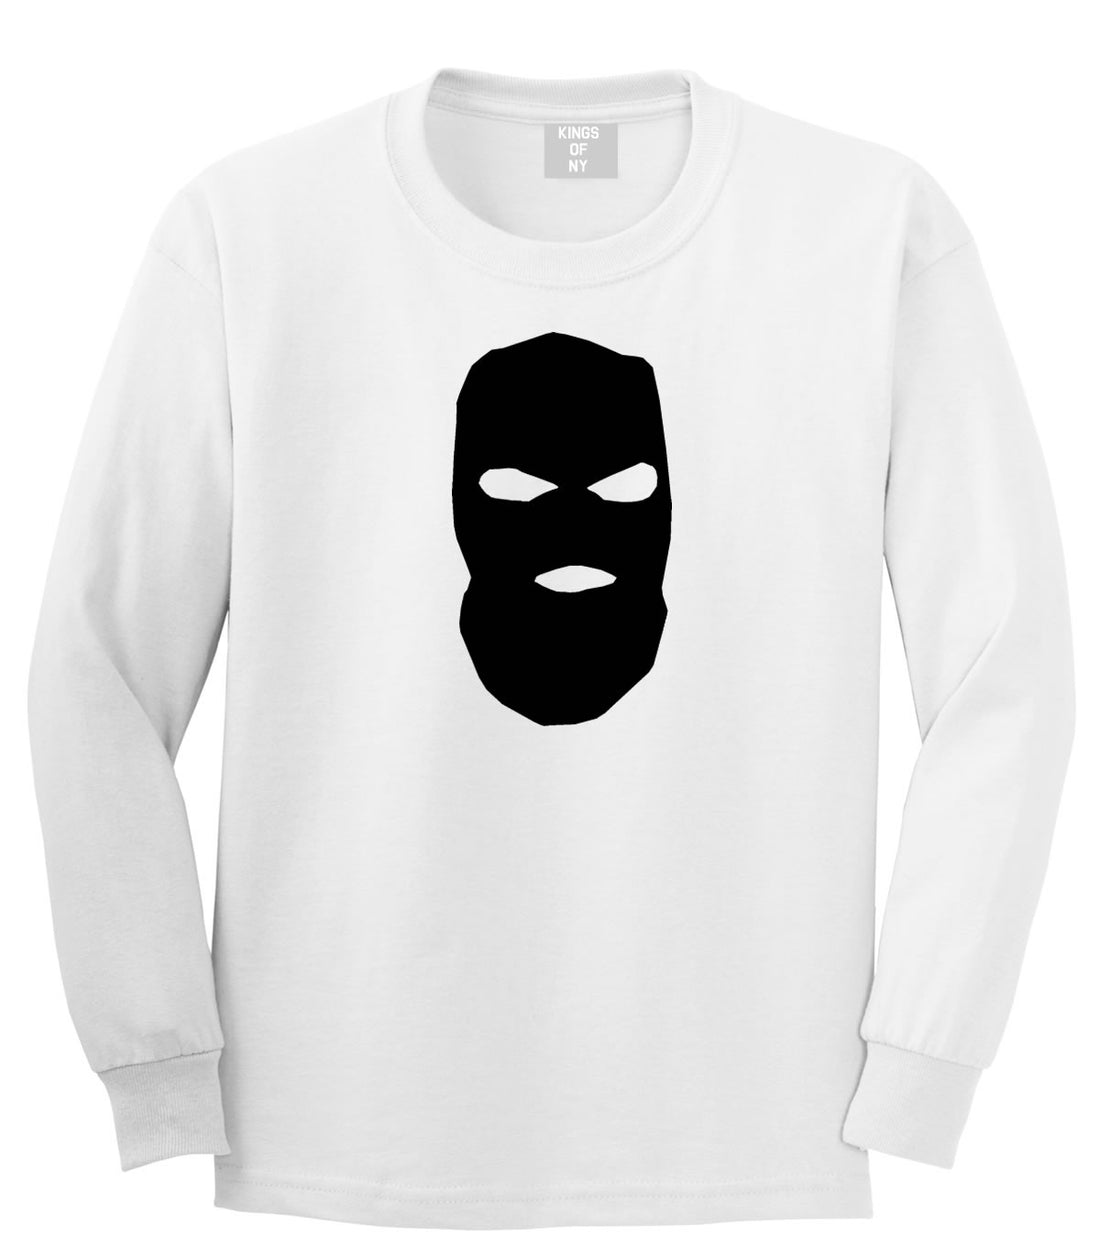 Ski Mask Way Robber Long Sleeve T-Shirt in White By Kings Of NY